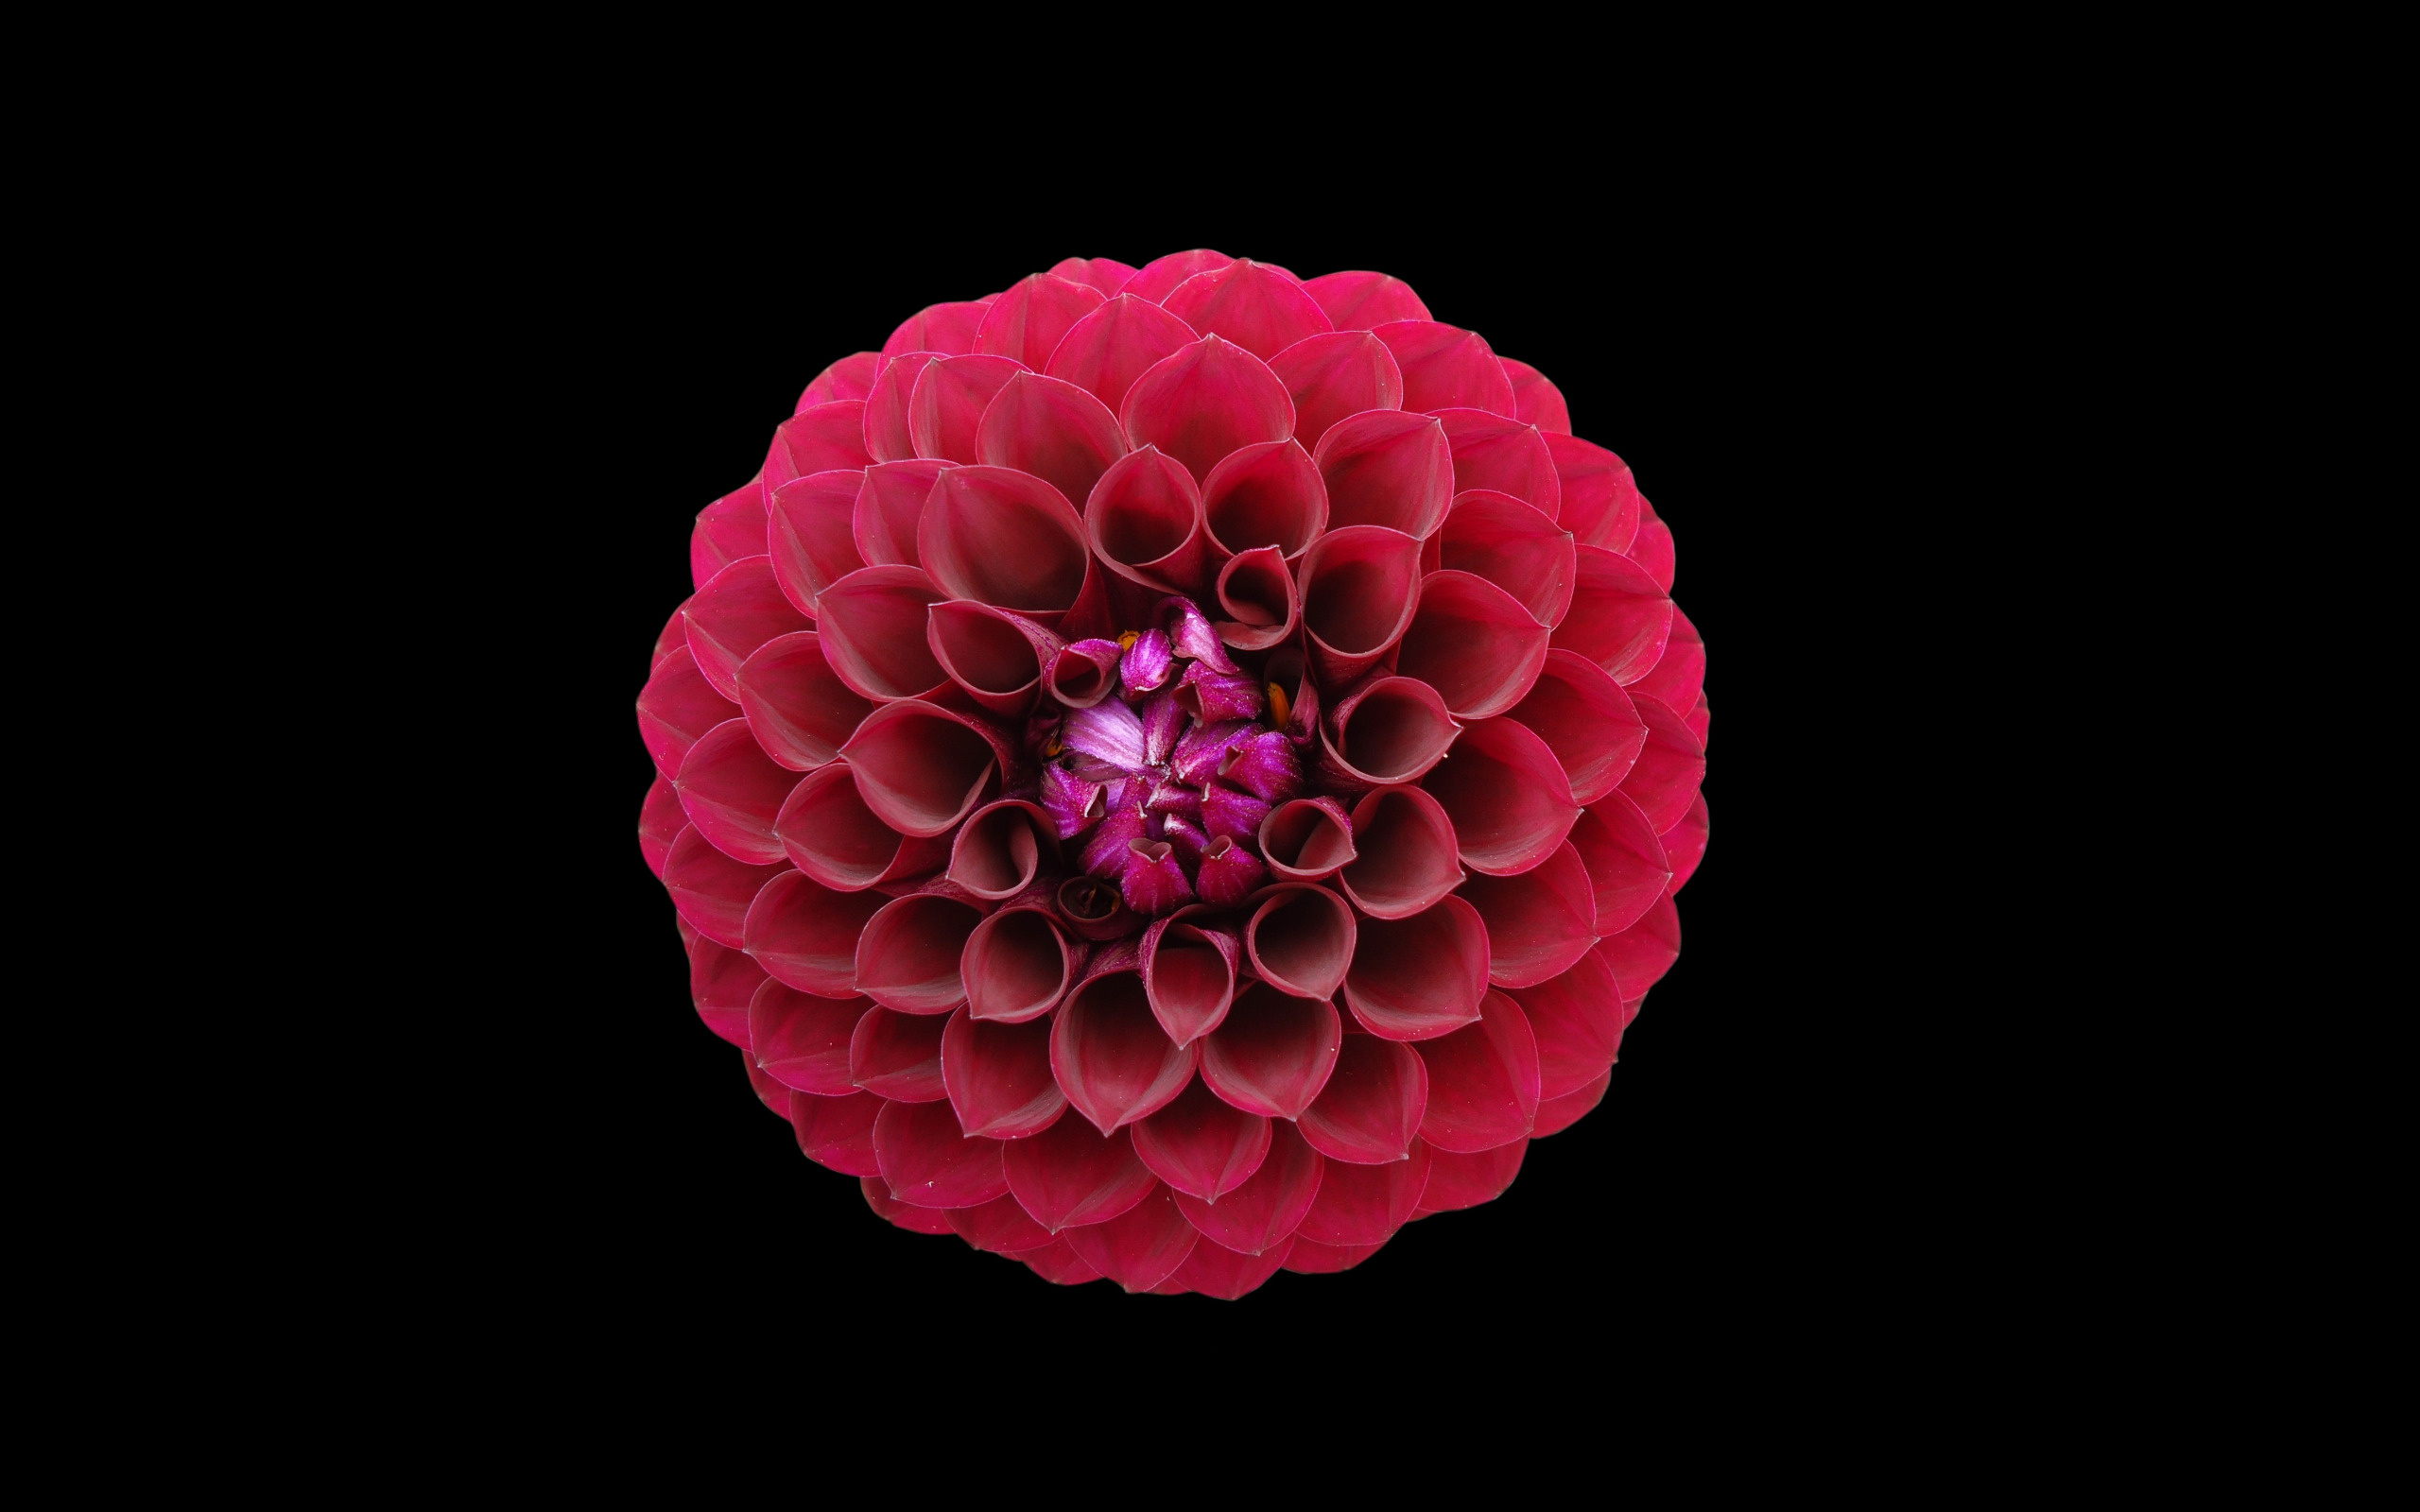 Golden Ratio: Red flower, Nature, Divine section, Harmonic division, Indian dahlia. 2560x1600 HD Wallpaper.